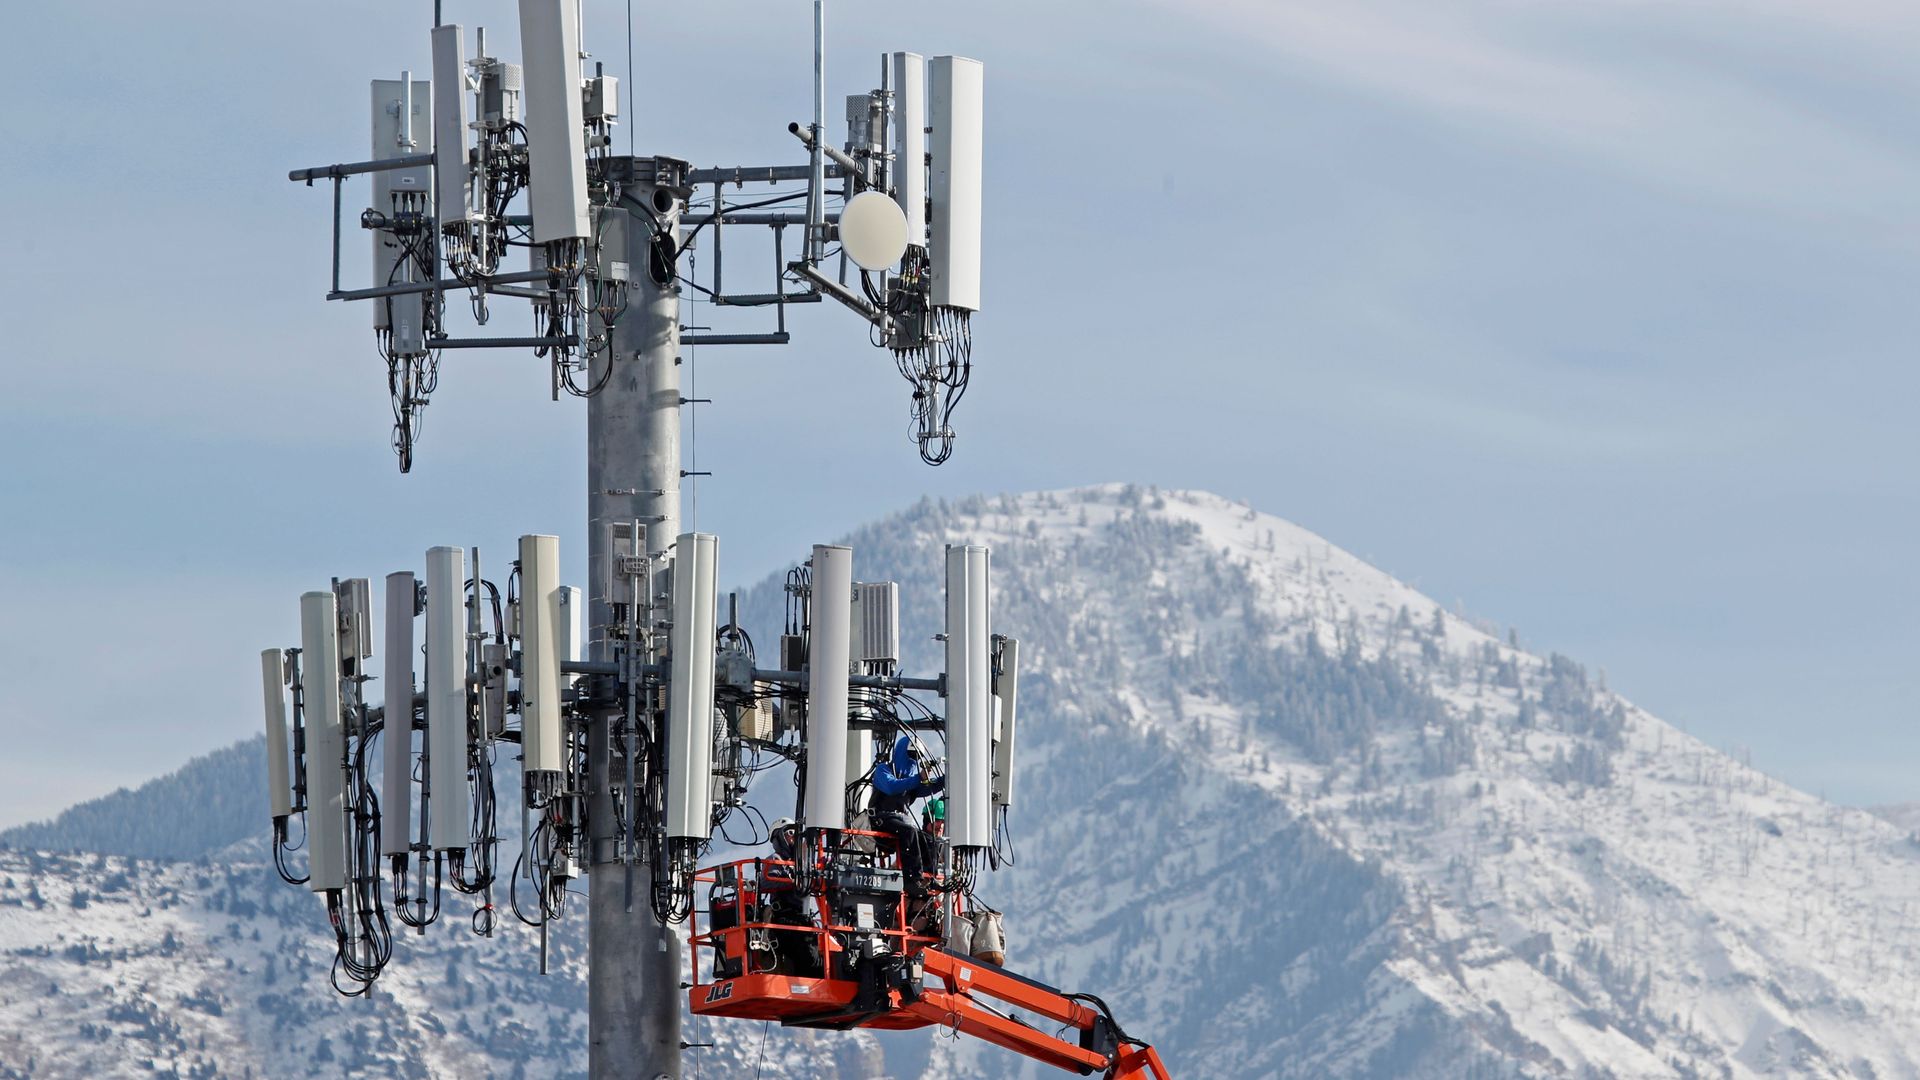 Photo of a cell tower with a crane working on it looming over a snowy mountain